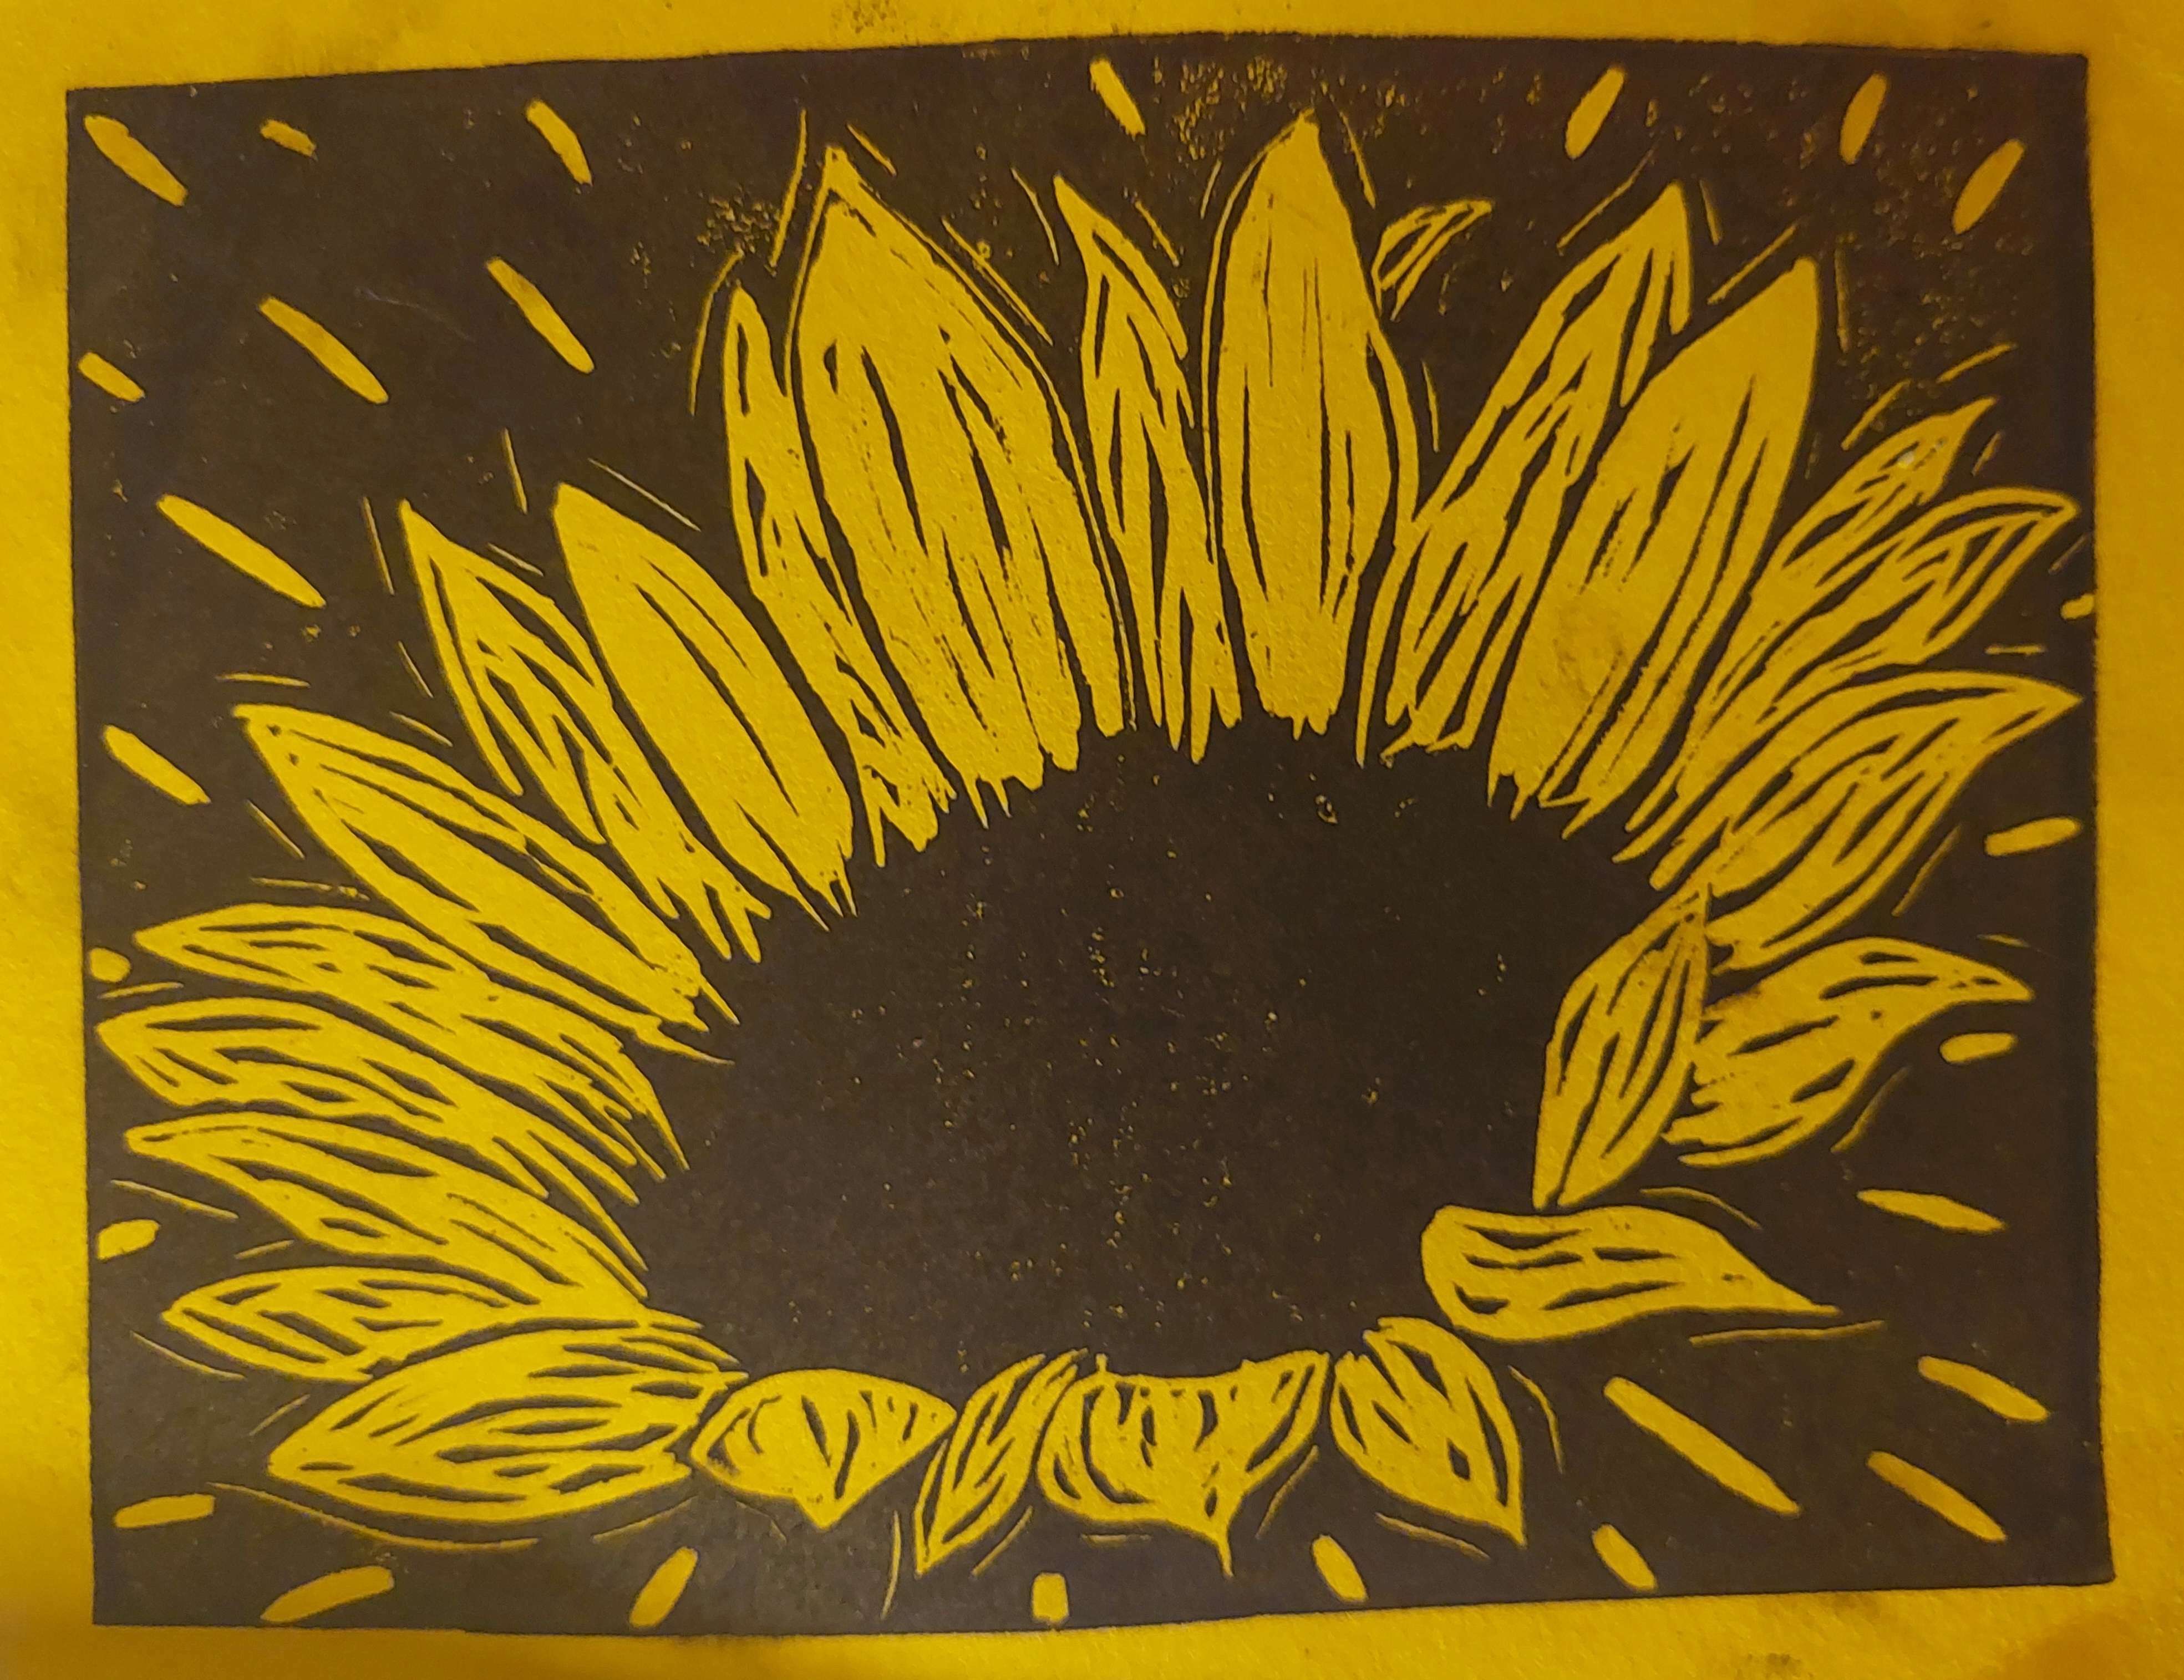 a linoblock print of a sunflower blooming. it is printed in black on yellow paper.